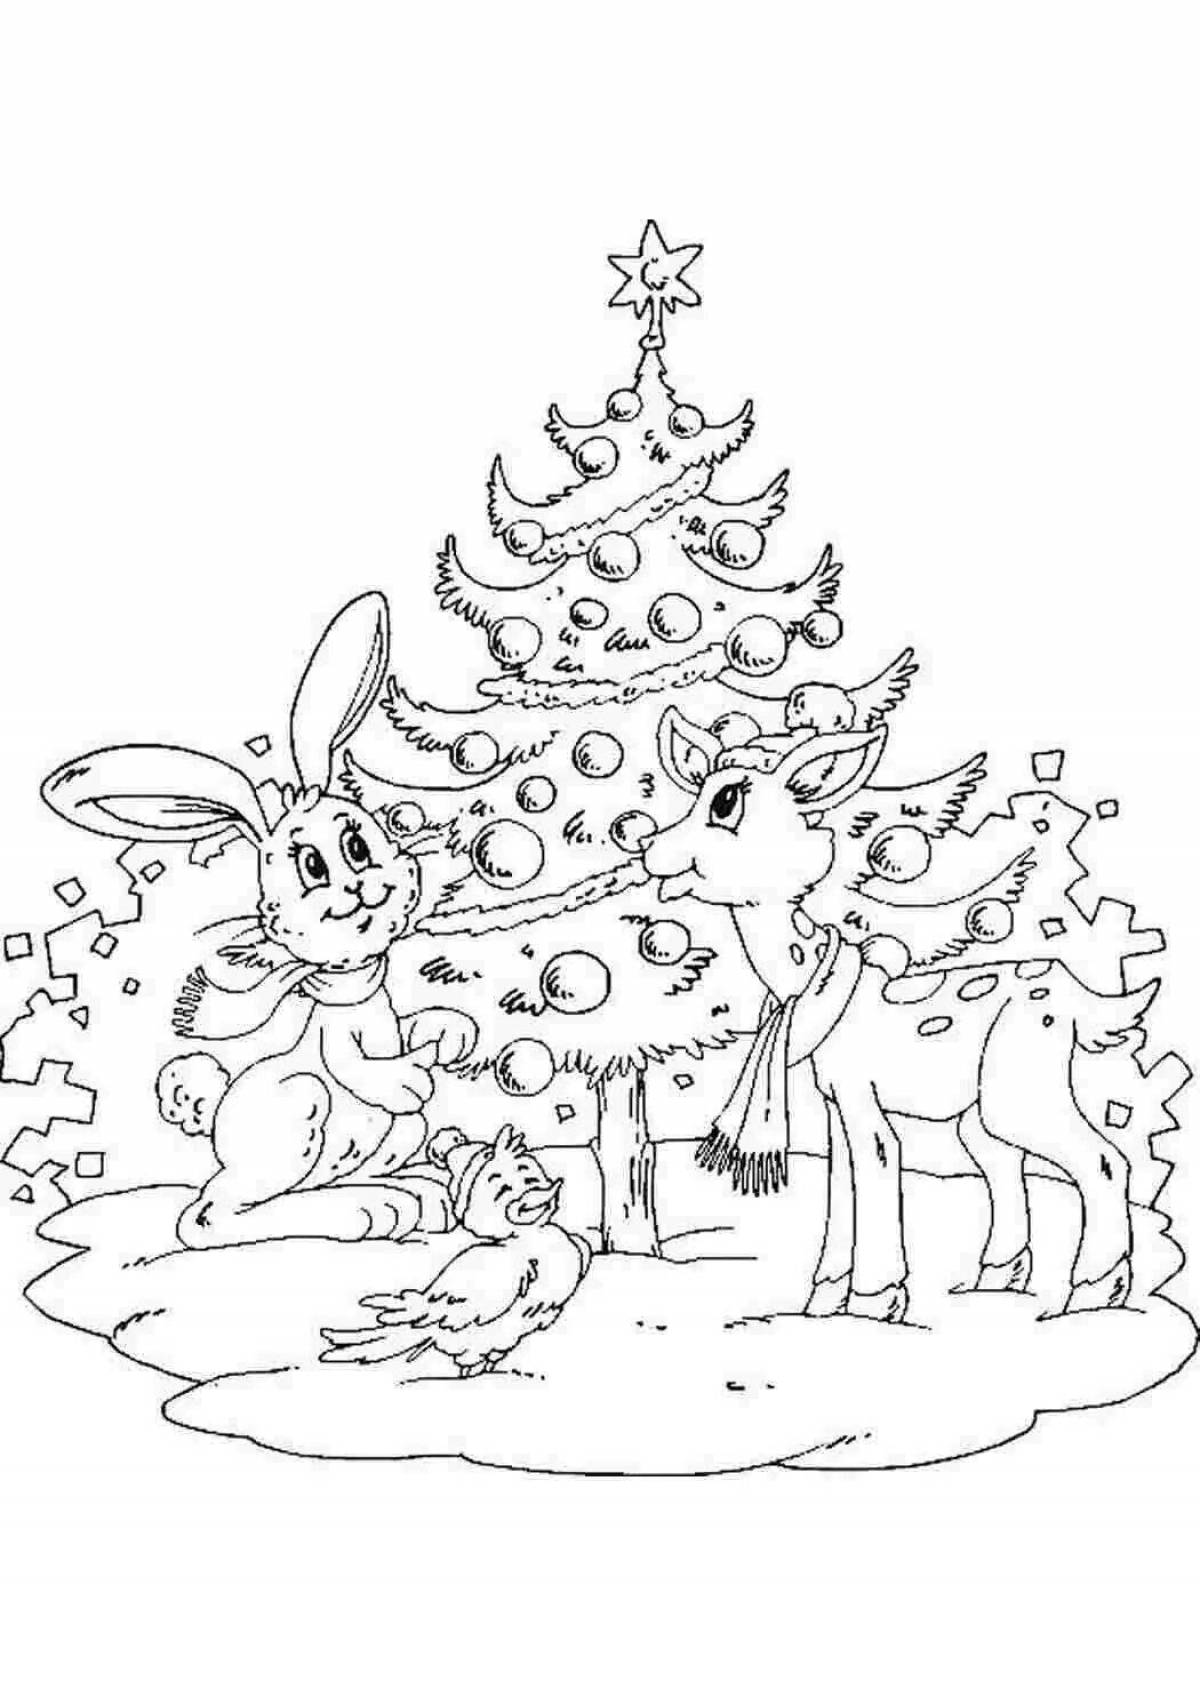 Coloring page lush forest grew a Christmas tree